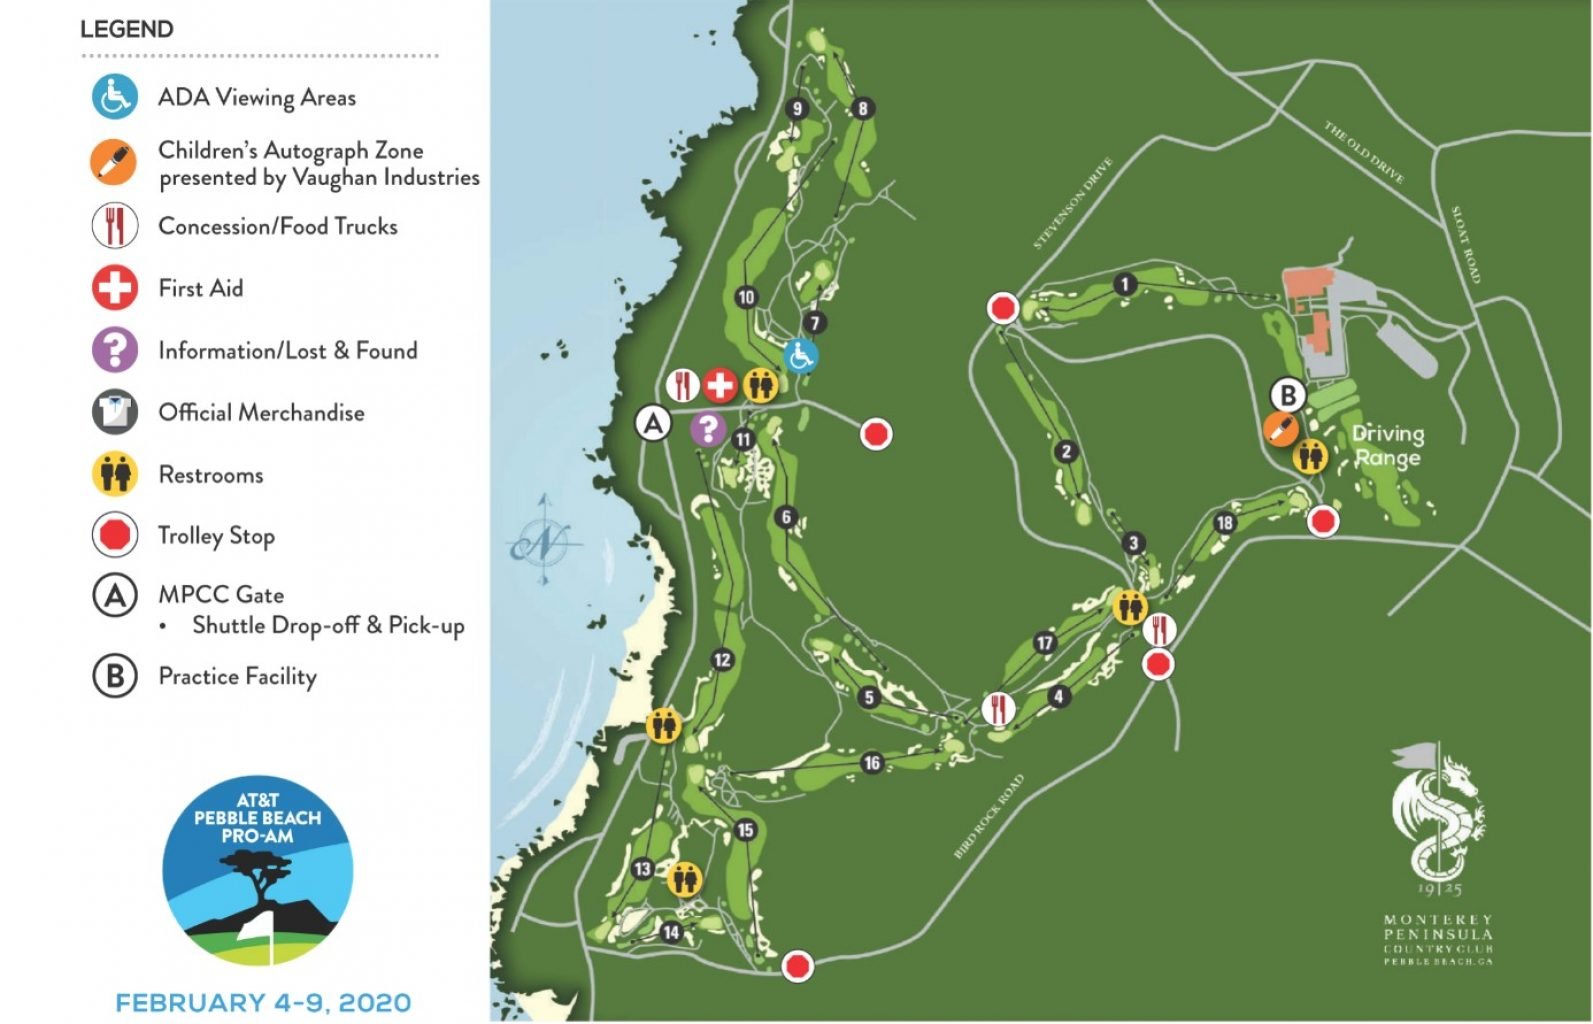 Mistillid masse Abe Spectator Guide: Everything You Need to Know to Attend The 2020 AT&T Pebble  Beach Pro-Am